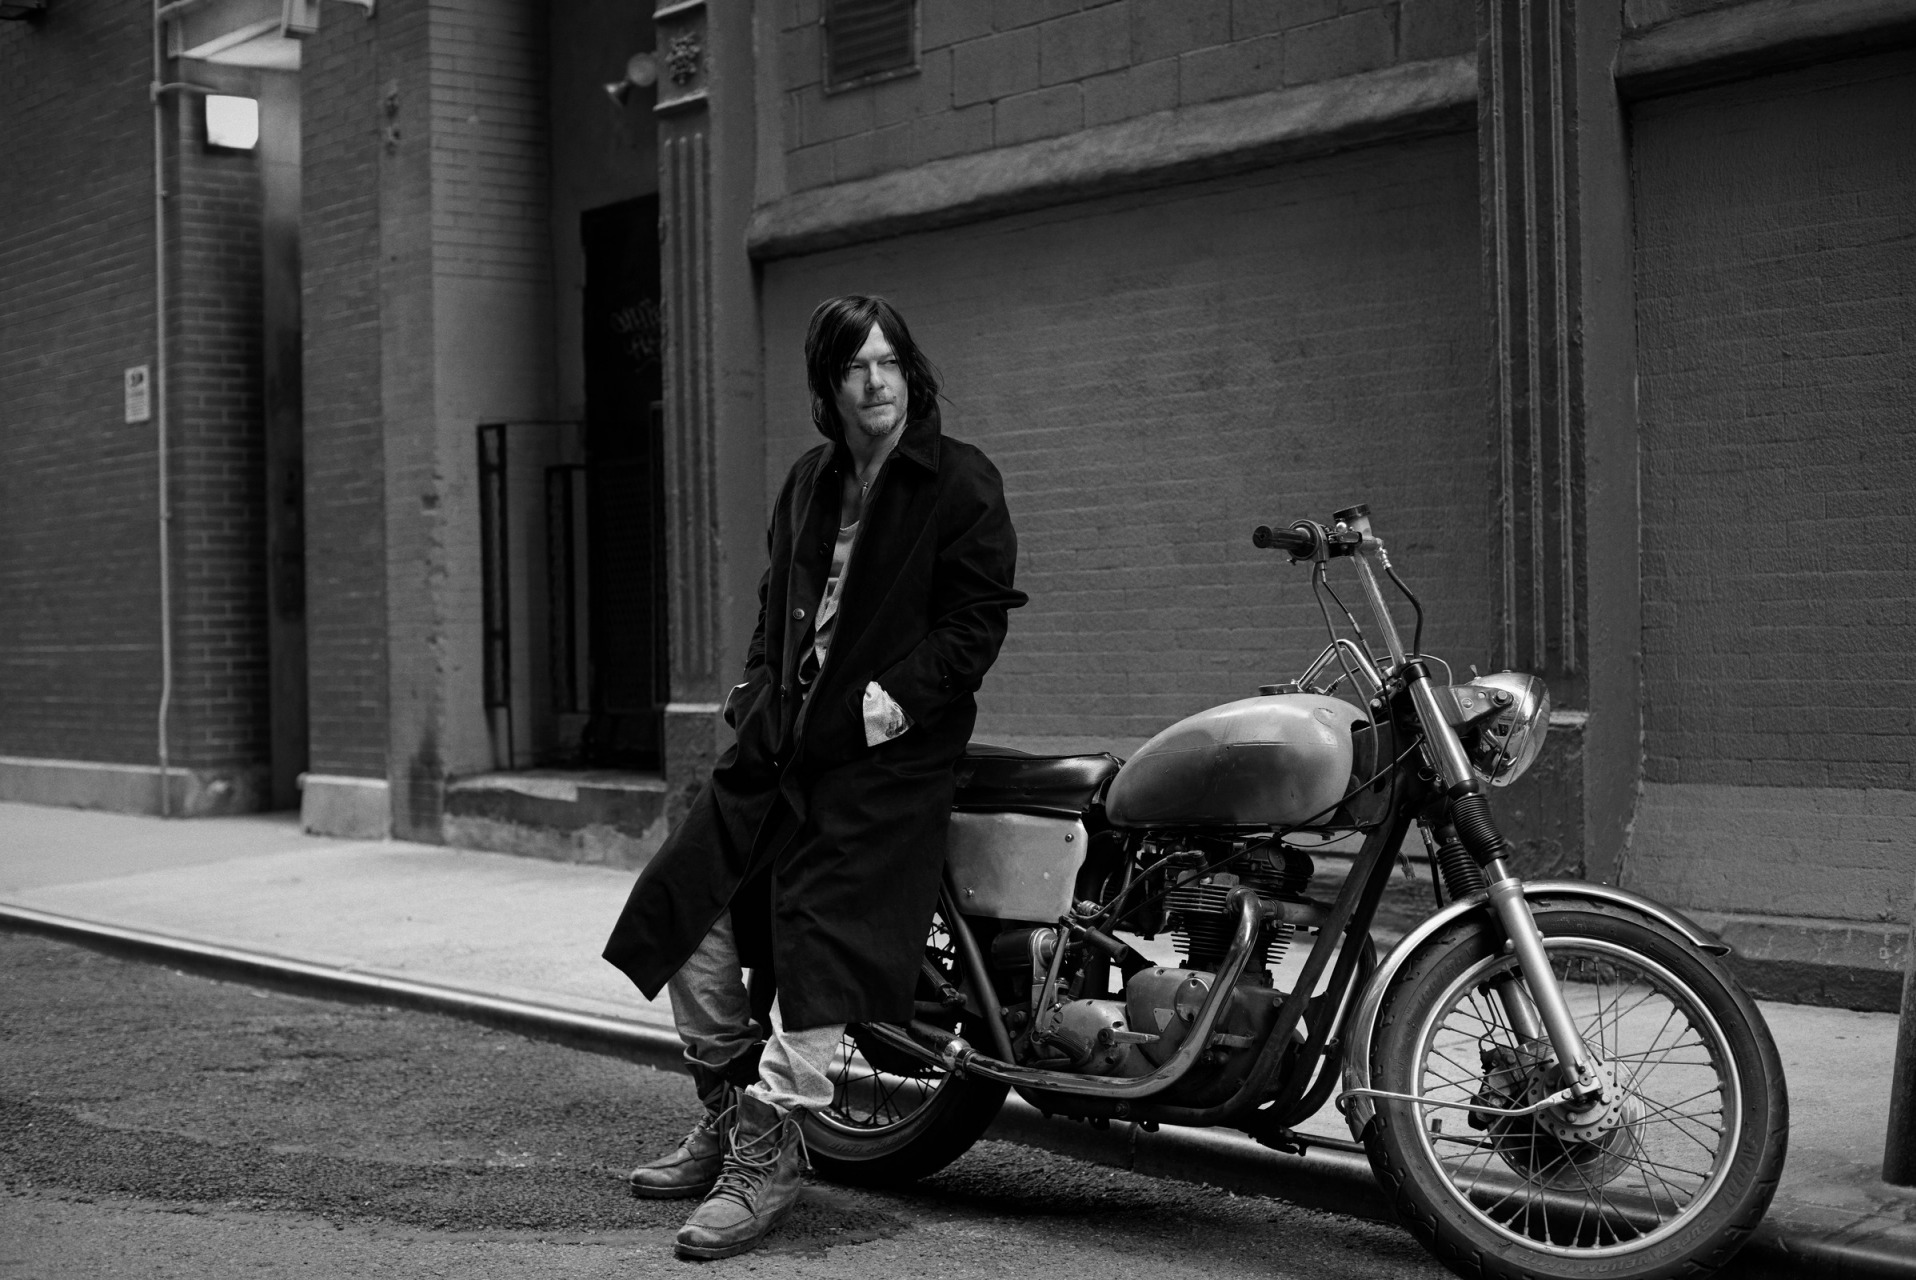 Model Actor Bikes Motorcycle Photography Celebrity Black Coat Looking At The Side Coats Dark Hair Lo 1916x1280